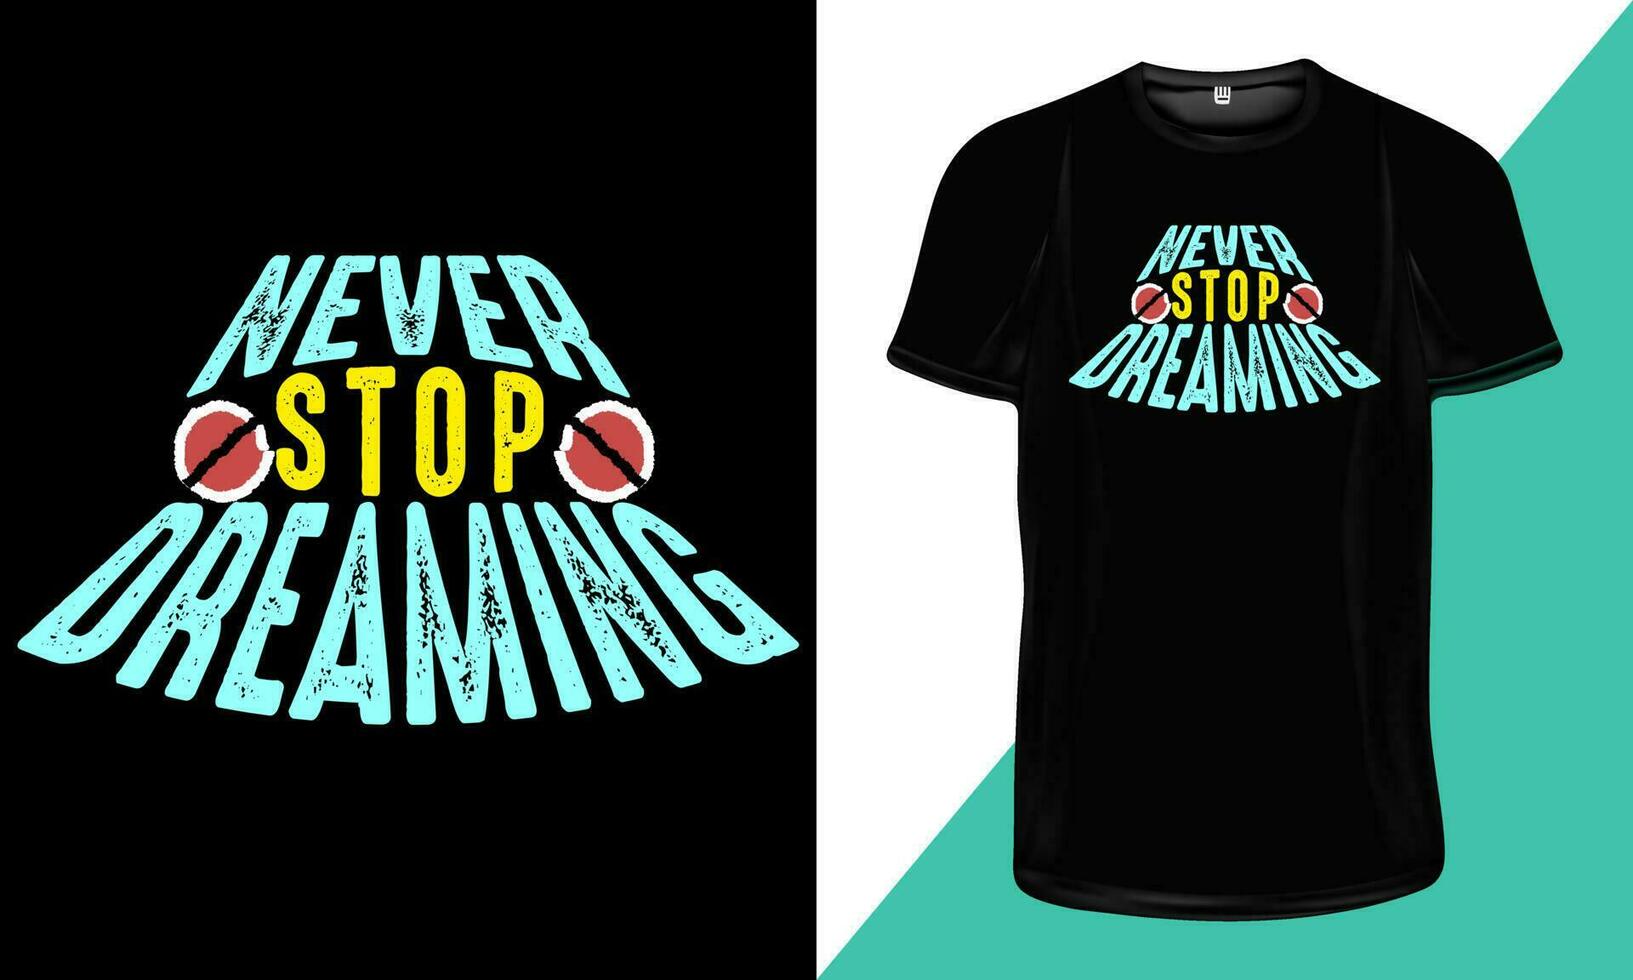 Never stop dreaming- Motivational Quotes on T-Shirt. Motivational T-Shirt Design. Motivational Typography Quotes T-Shirt Design. vector